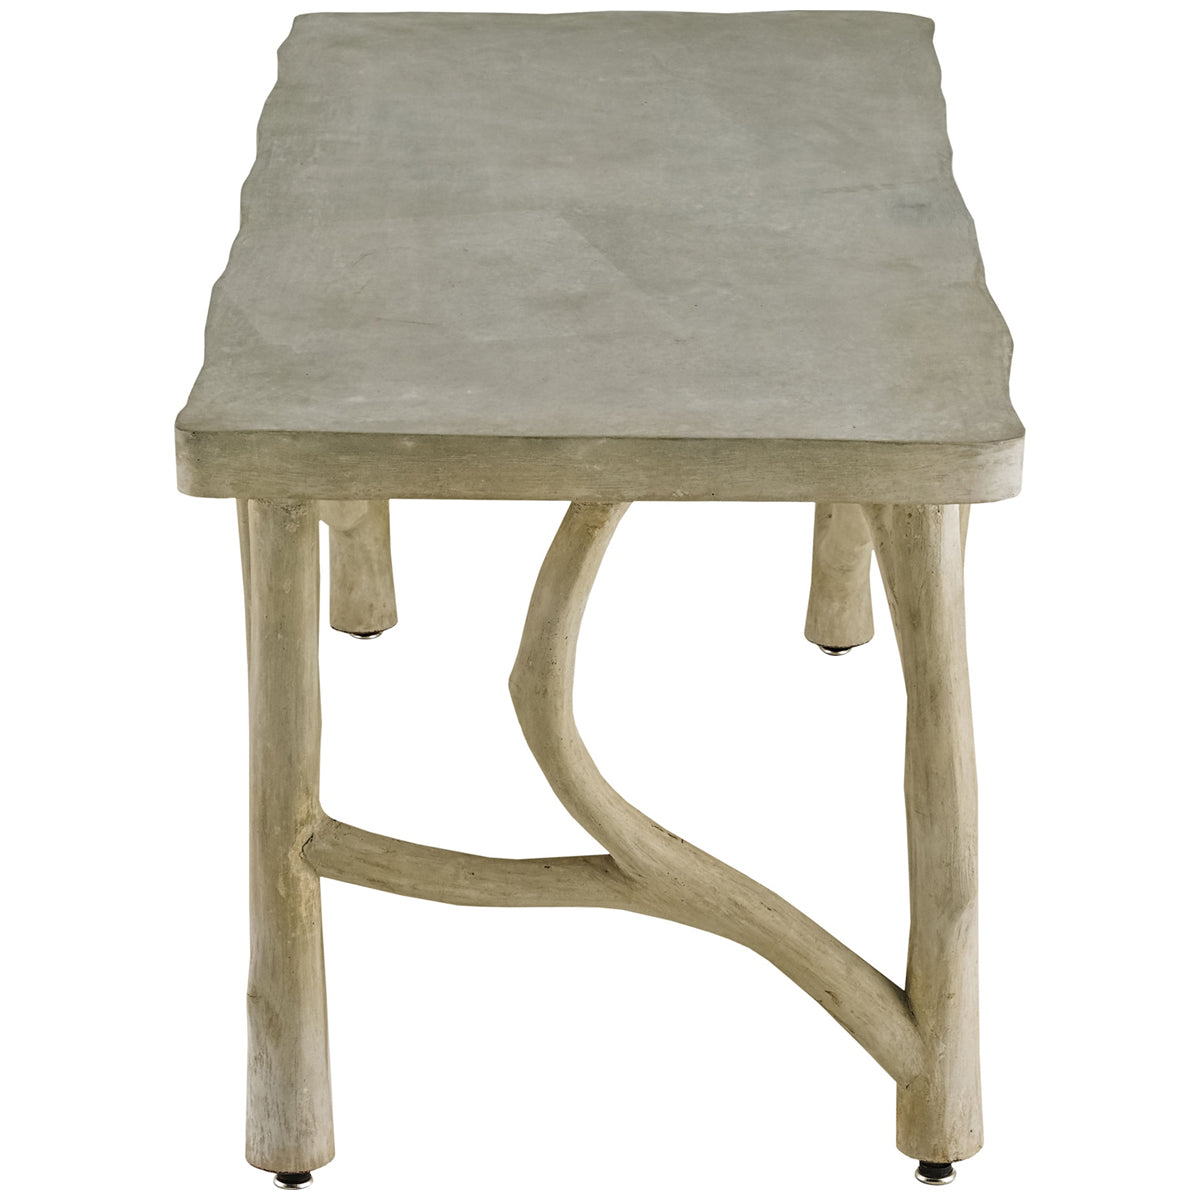 Currey and Company Creekside Table/Bench